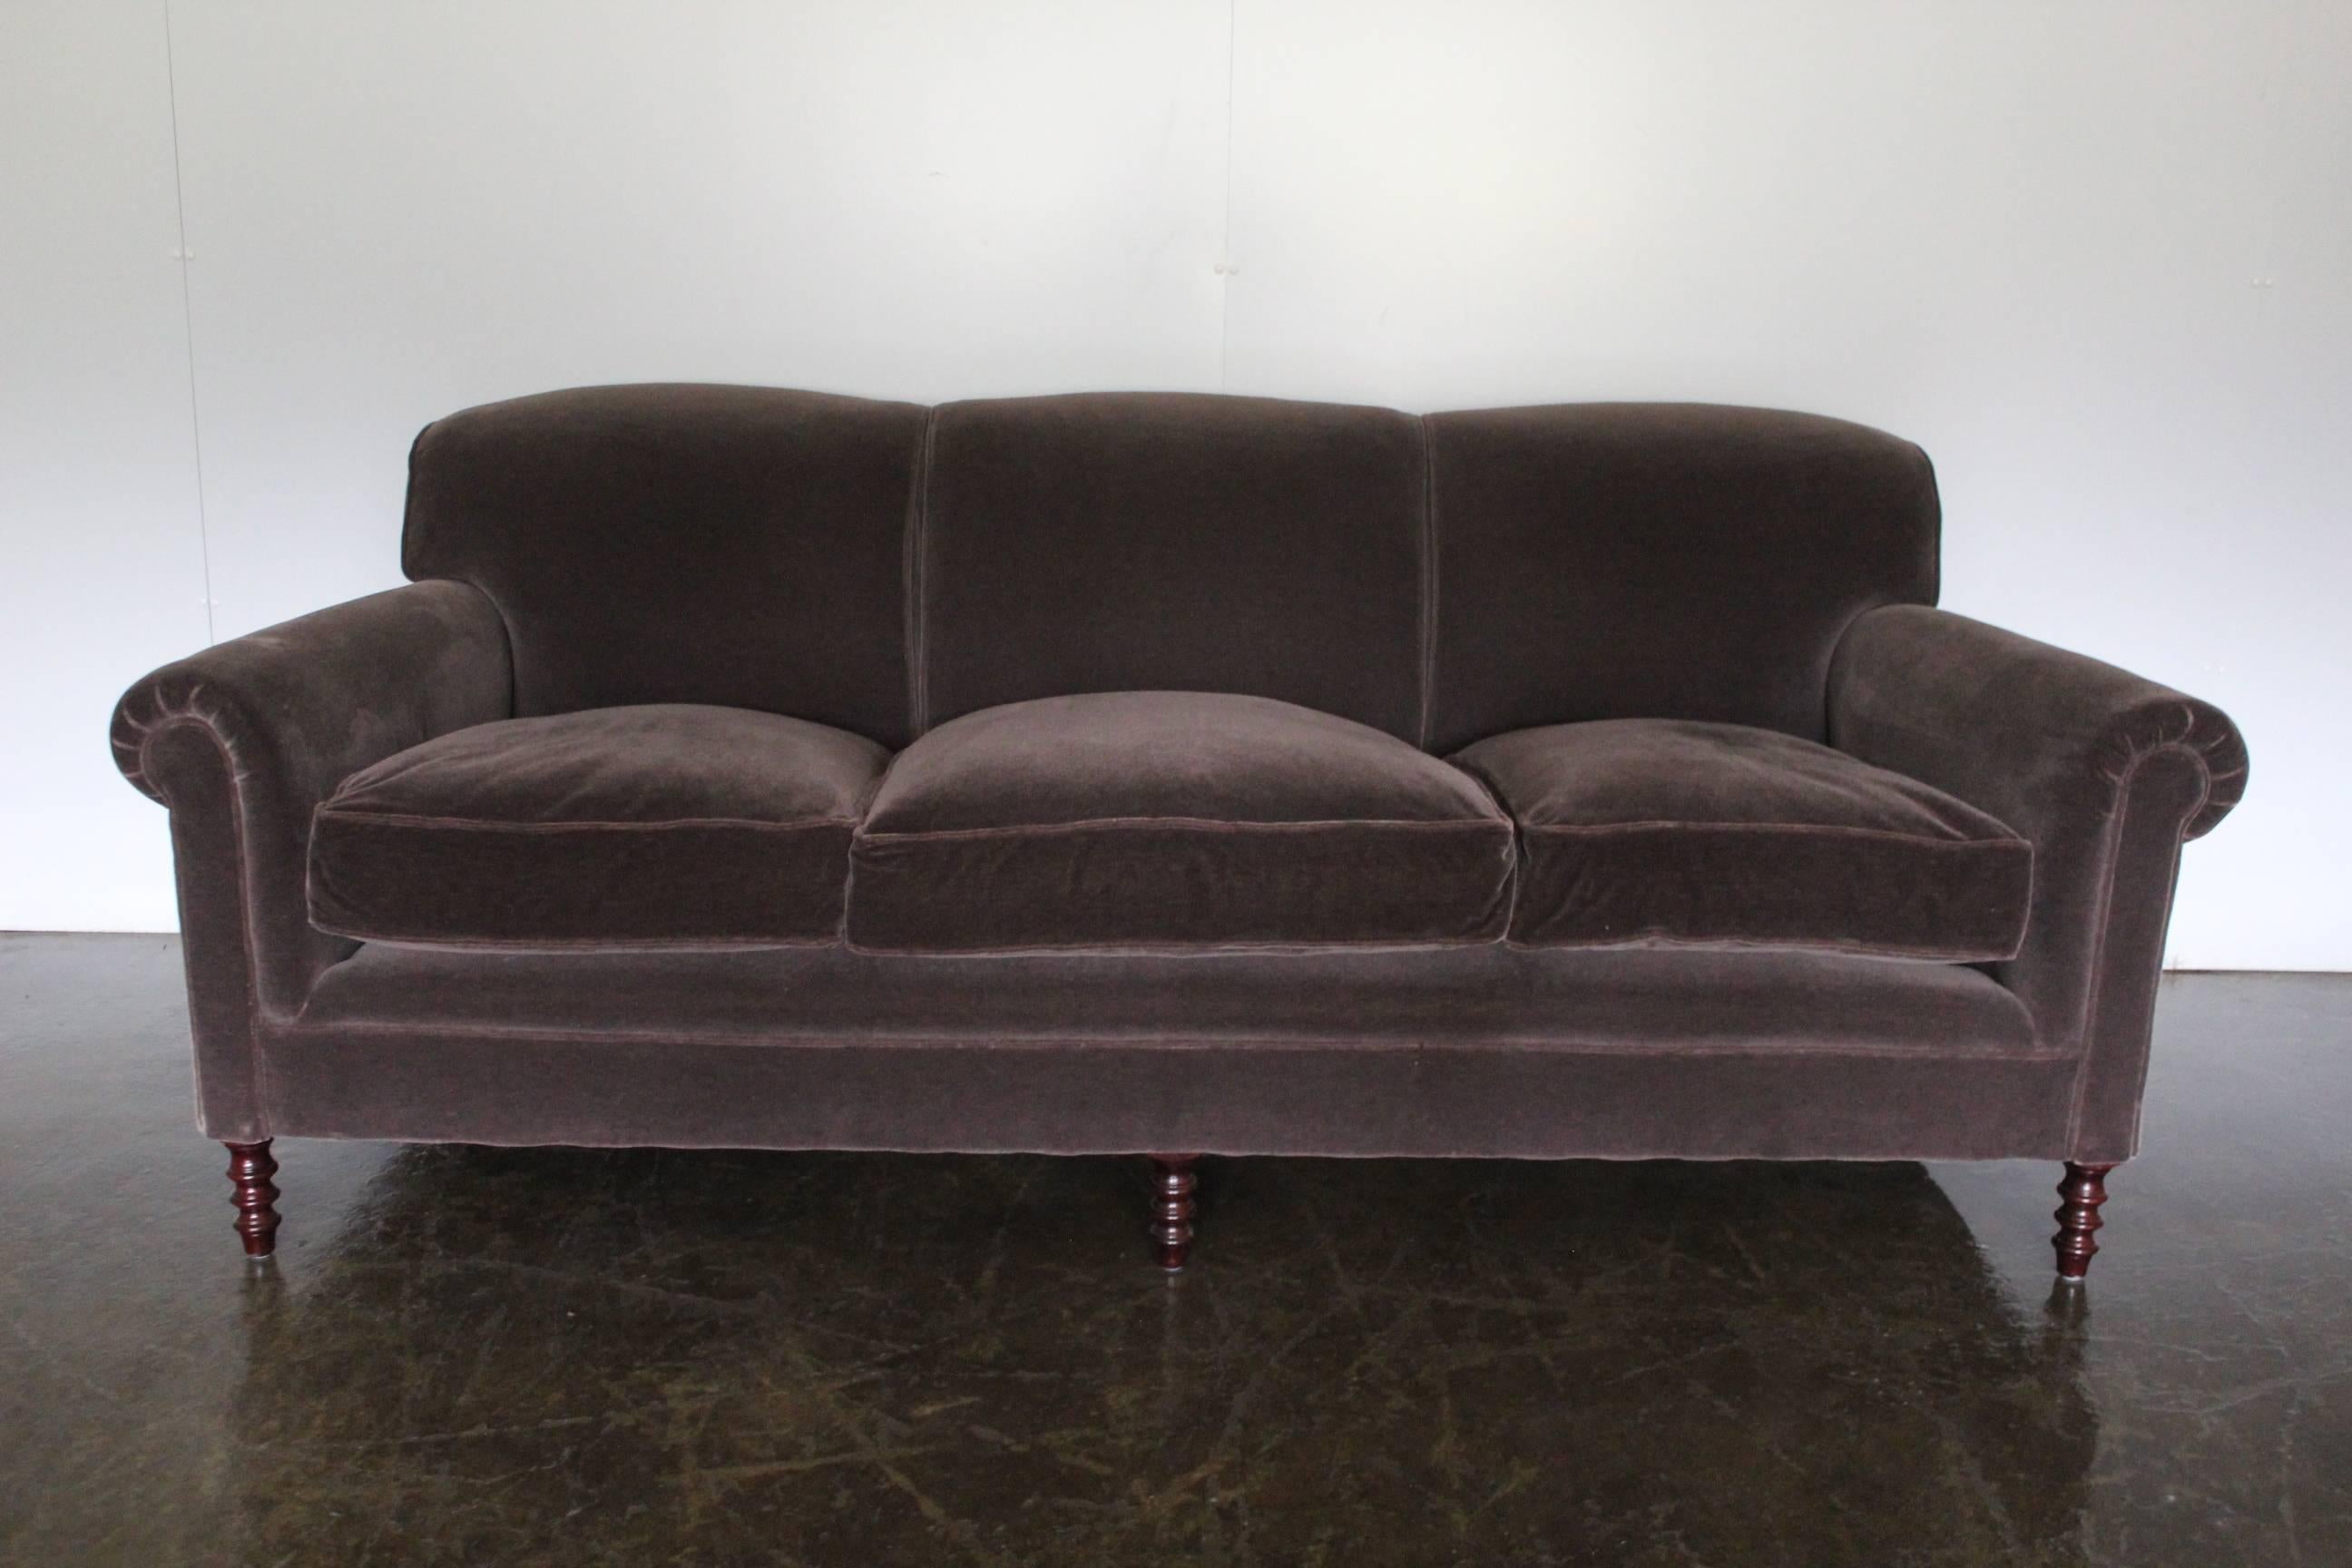 On offer on this occasion is a superb identical pair of George Smith signature ” Scroll-Arm” fixed-back large three-seat sofas in their most stunning mohair velvet fabric in “Mink” brown, and furnished with dark-oak hand-turned legs.
As you will no